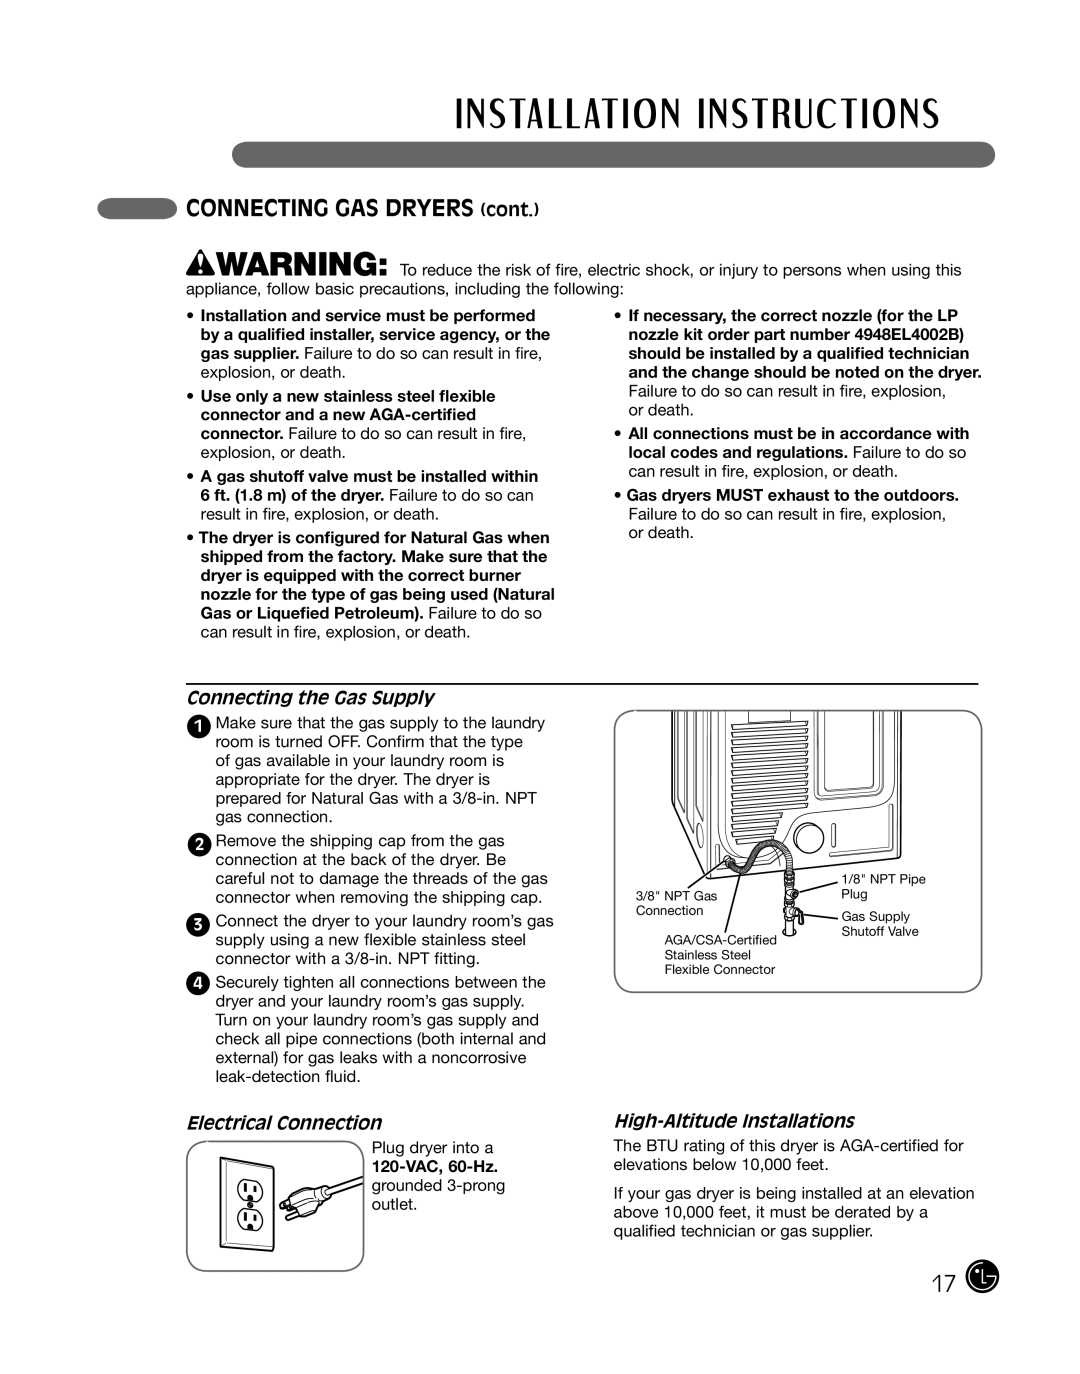 LG Electronics P154 manual ConnecTING GAS DRYERS cont, Connecting the Gas Supply, Electrical Connection 